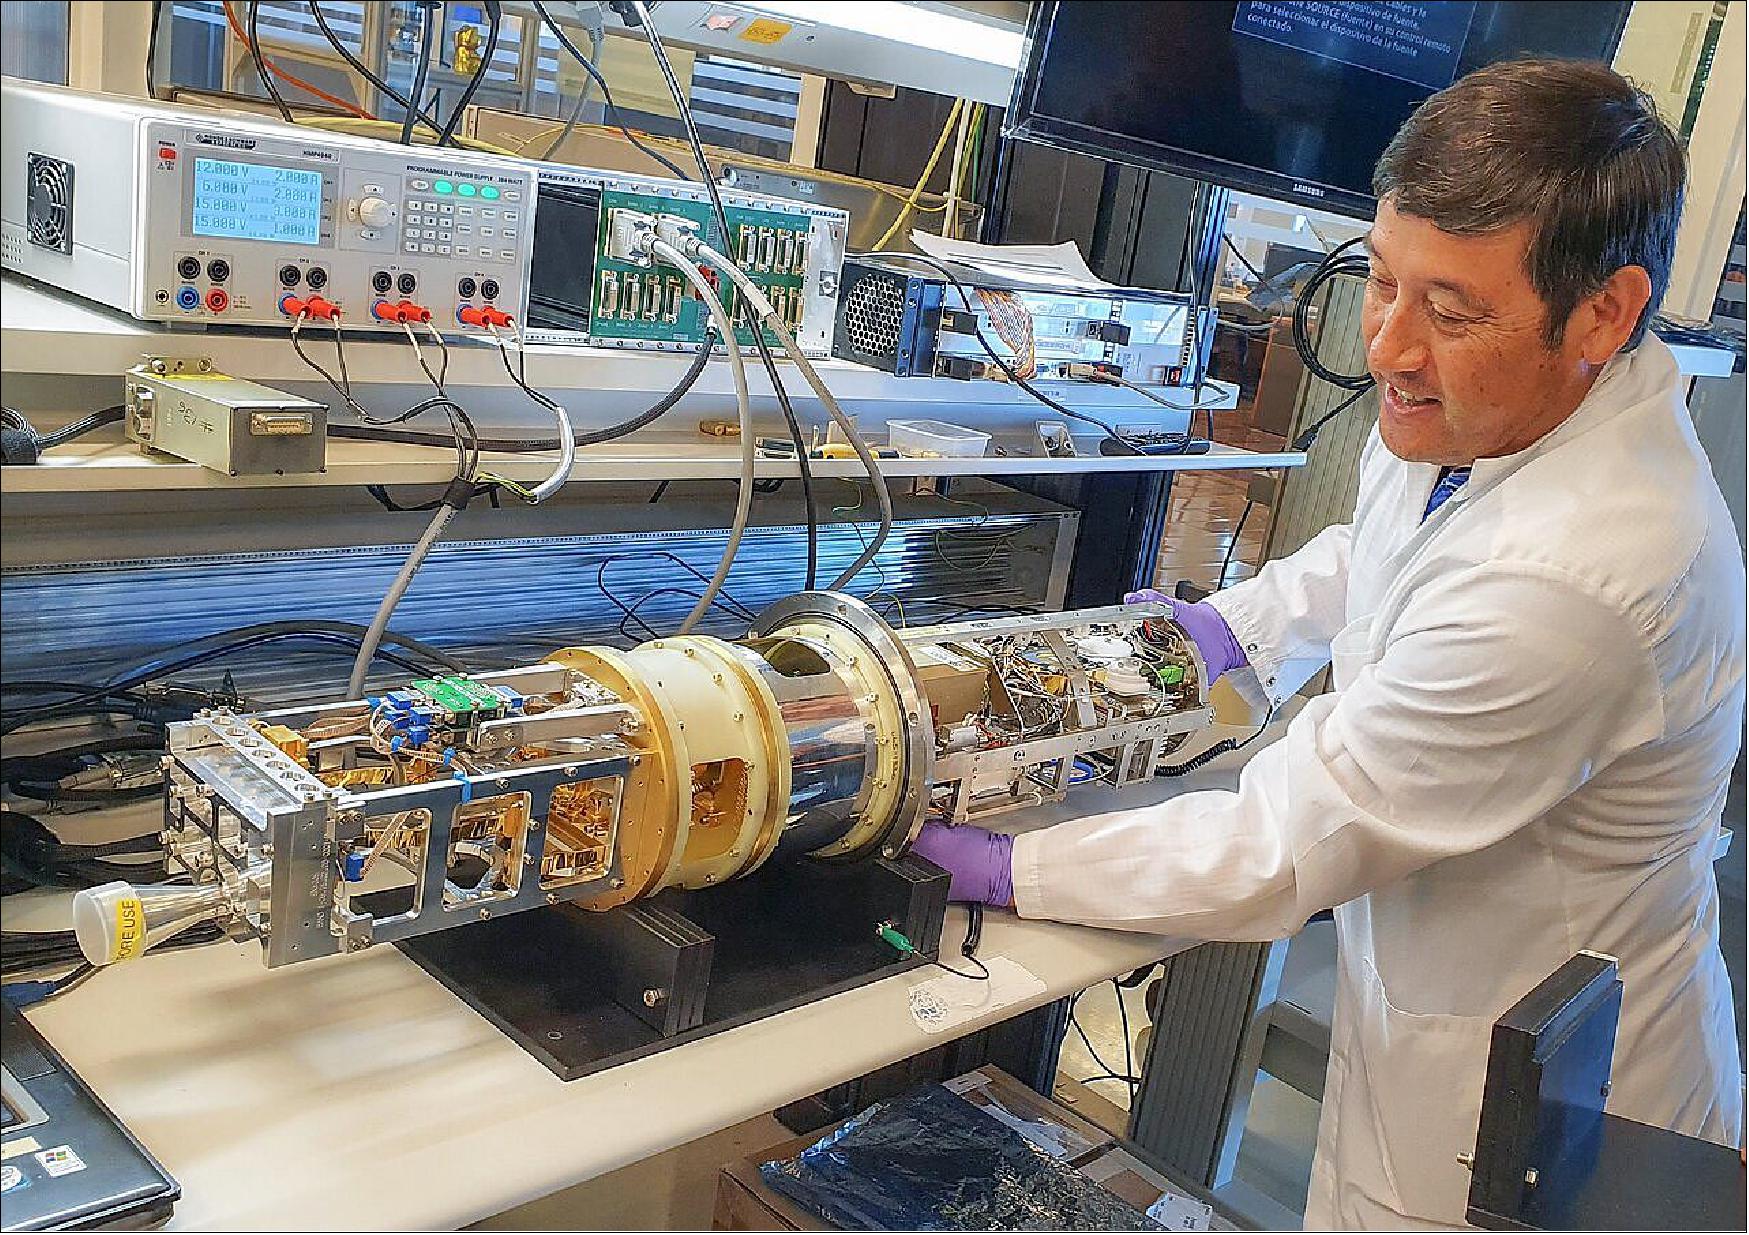 Figure 32: Assembly of ALMA band 1 cartridges. Electronics Technician Nelson Tabilo assembles one of the cold and warm cartridges which form part of the band 1 receivers installed on ALMA. The band 1 receivers pick up radio waves between 6 and 8.5 mm in length, the longest wavelength that ALMA is able to measure [image credit: G. Siringo, ALMA (ESO/NAOJ/NRAO)]